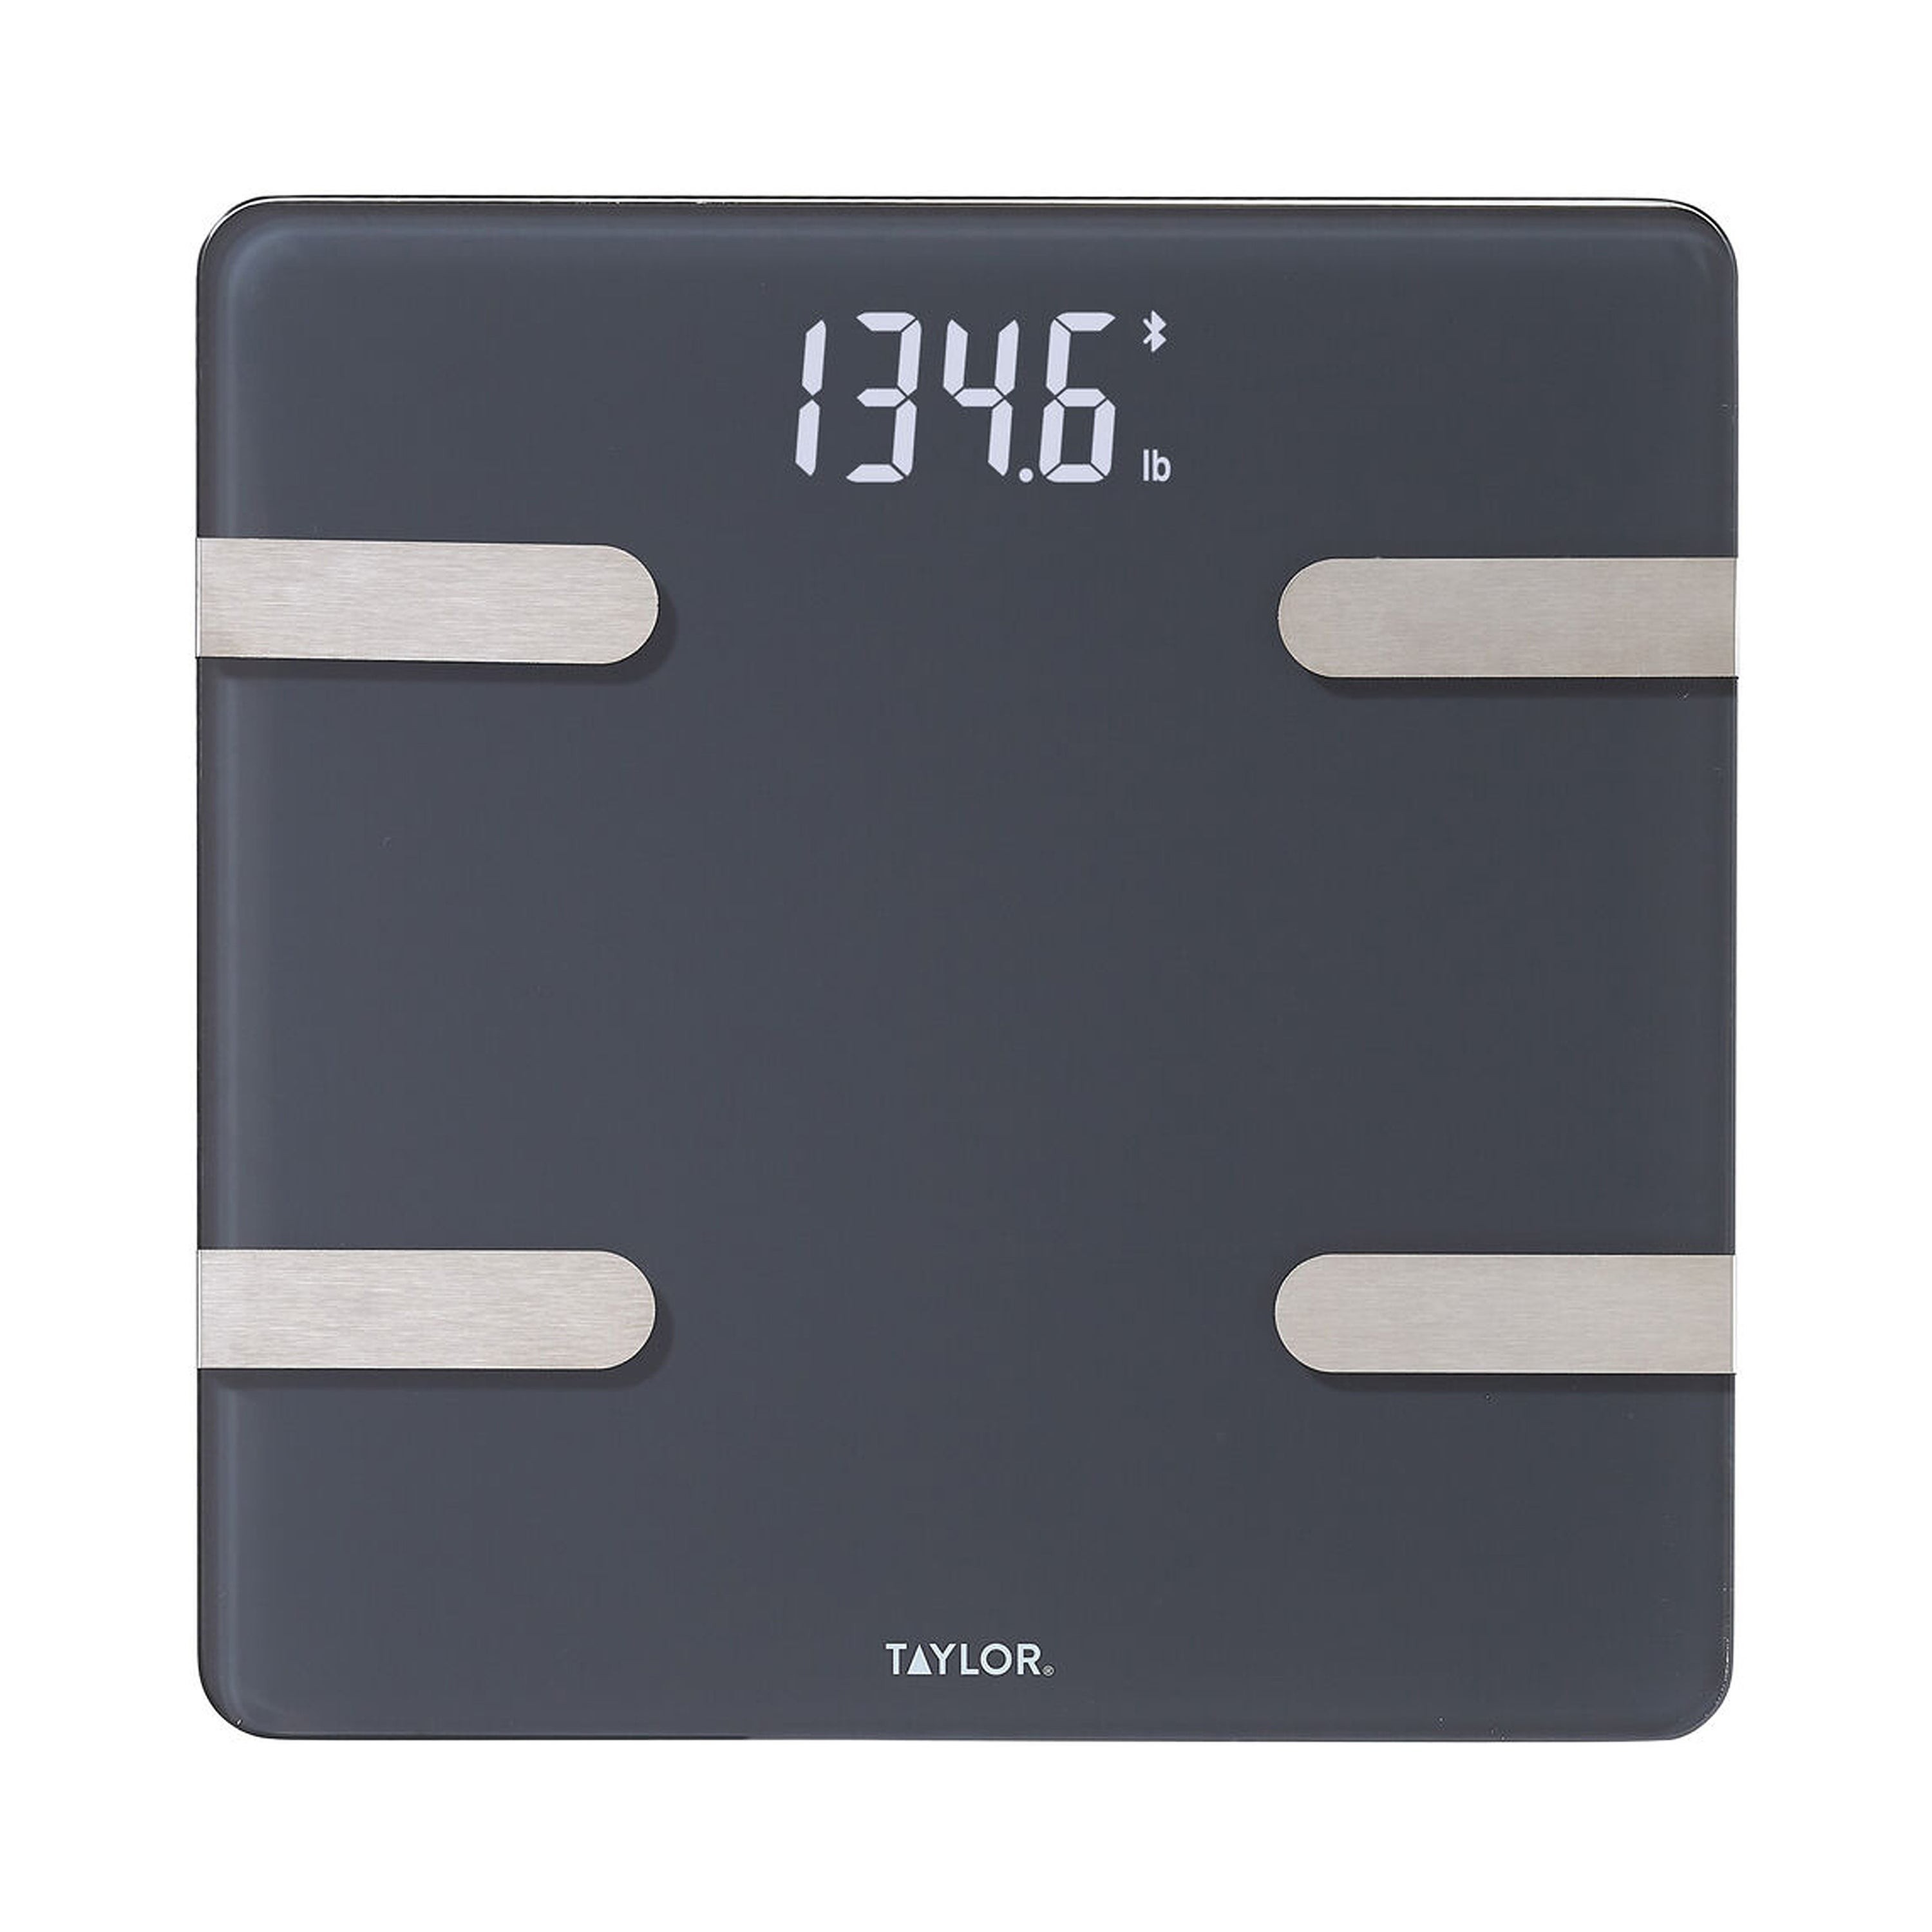 Bluetooth Smart Body Composition Scale w/ AIFit App